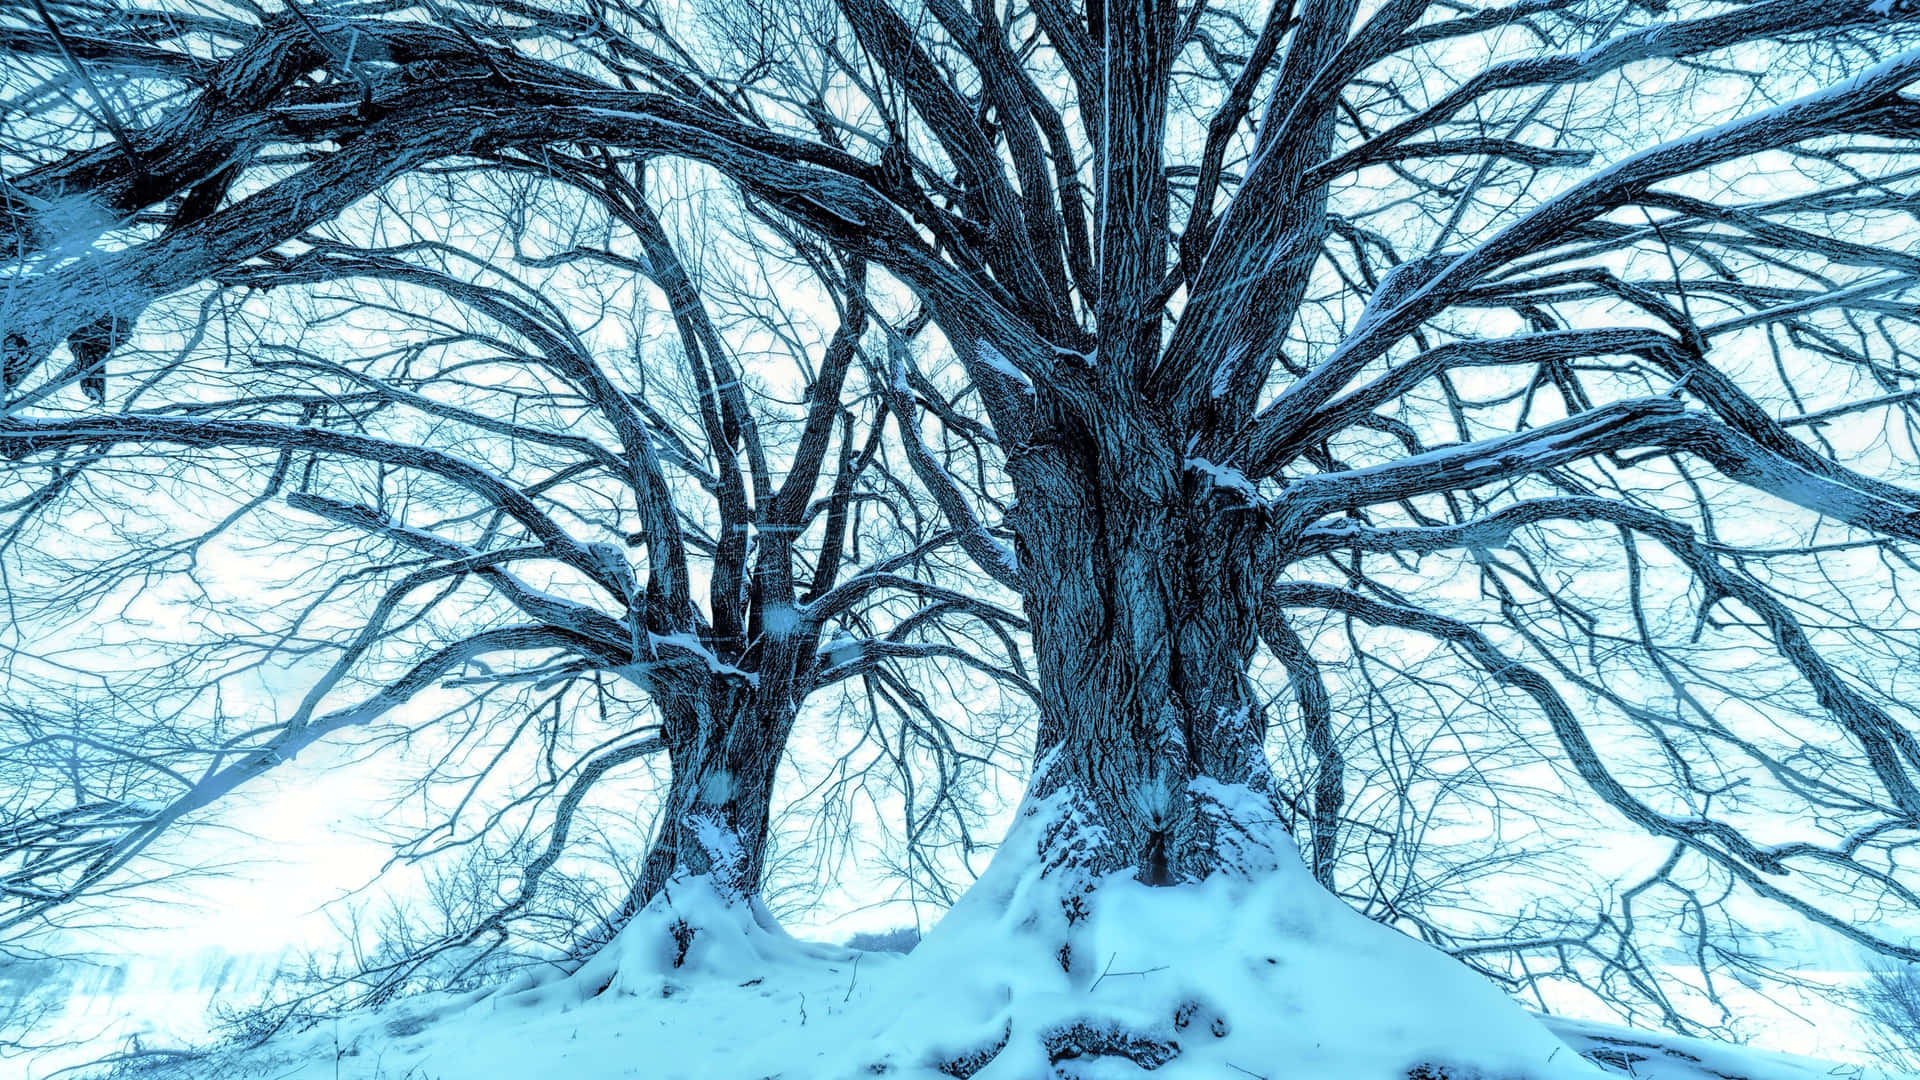 Tranquil Snow-Covered Trees in Winter Landscape Wallpaper